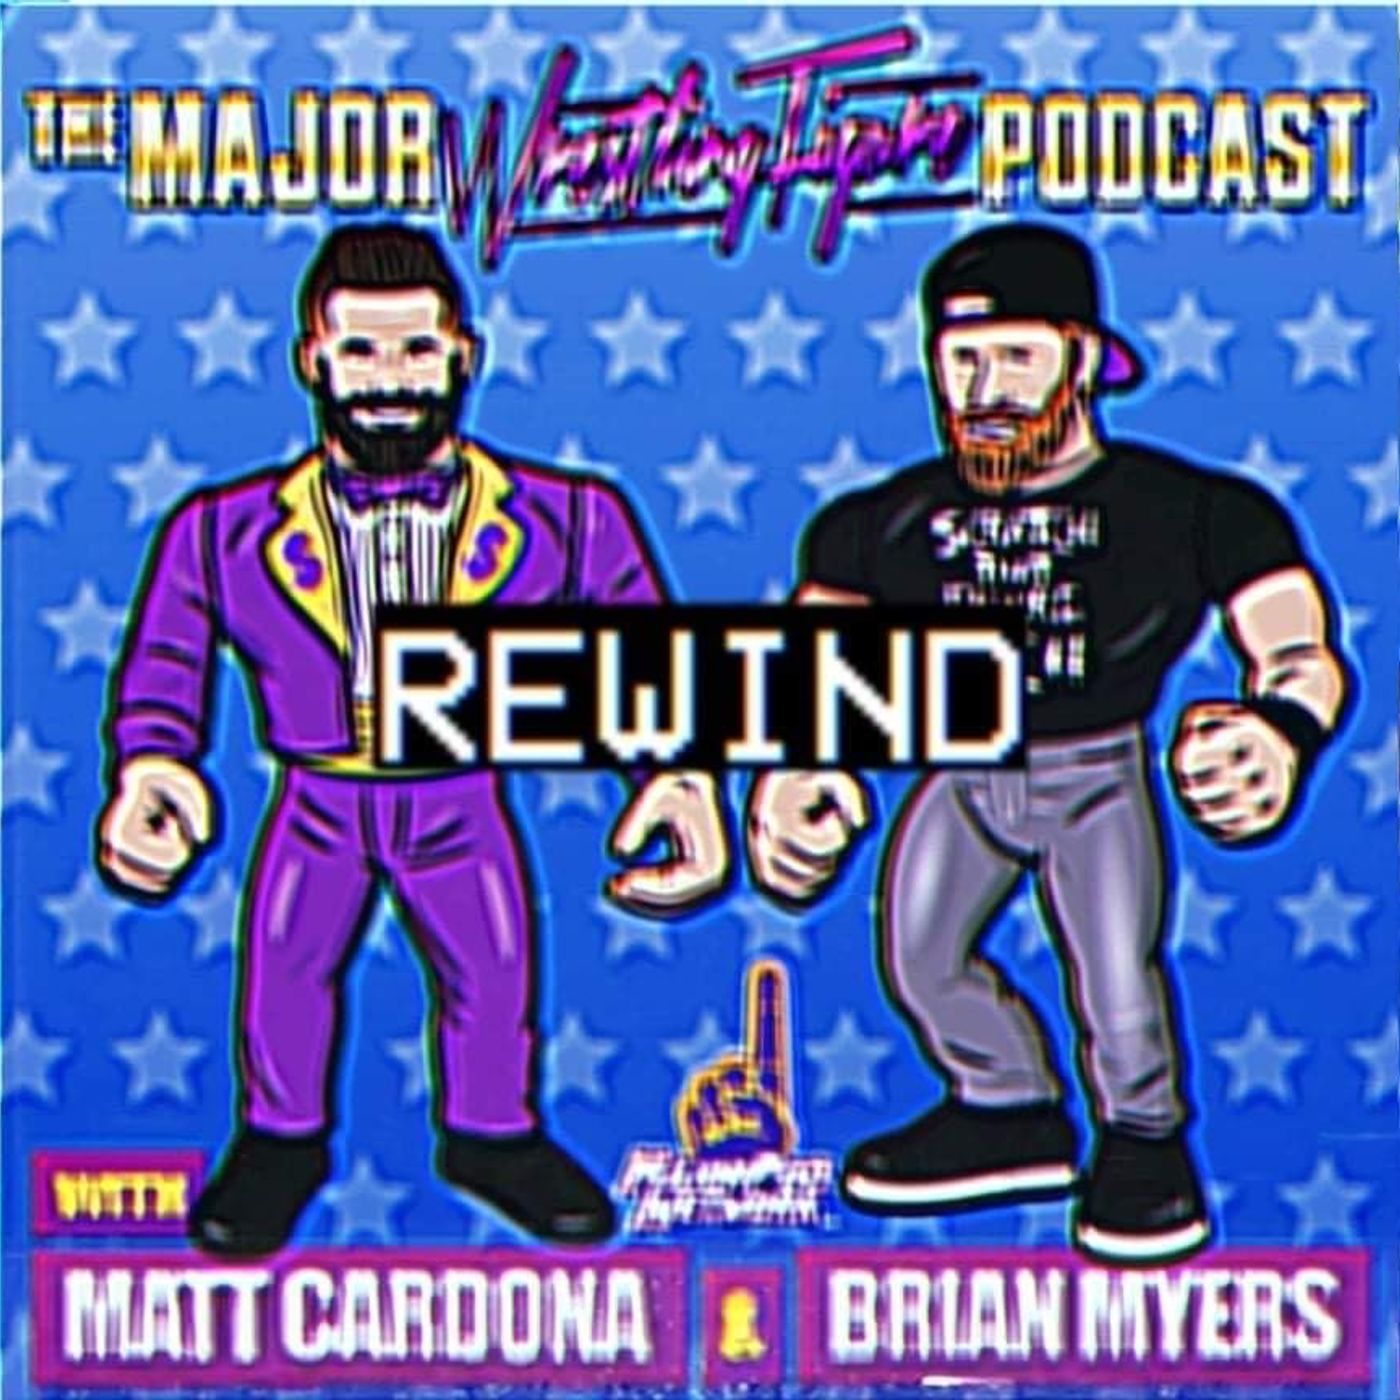 MWFP Rewind 43 - Edgeheads born at Kowloon’s! The Rock debuts! The Toys that Screwed Us! Hogan’s Hog!